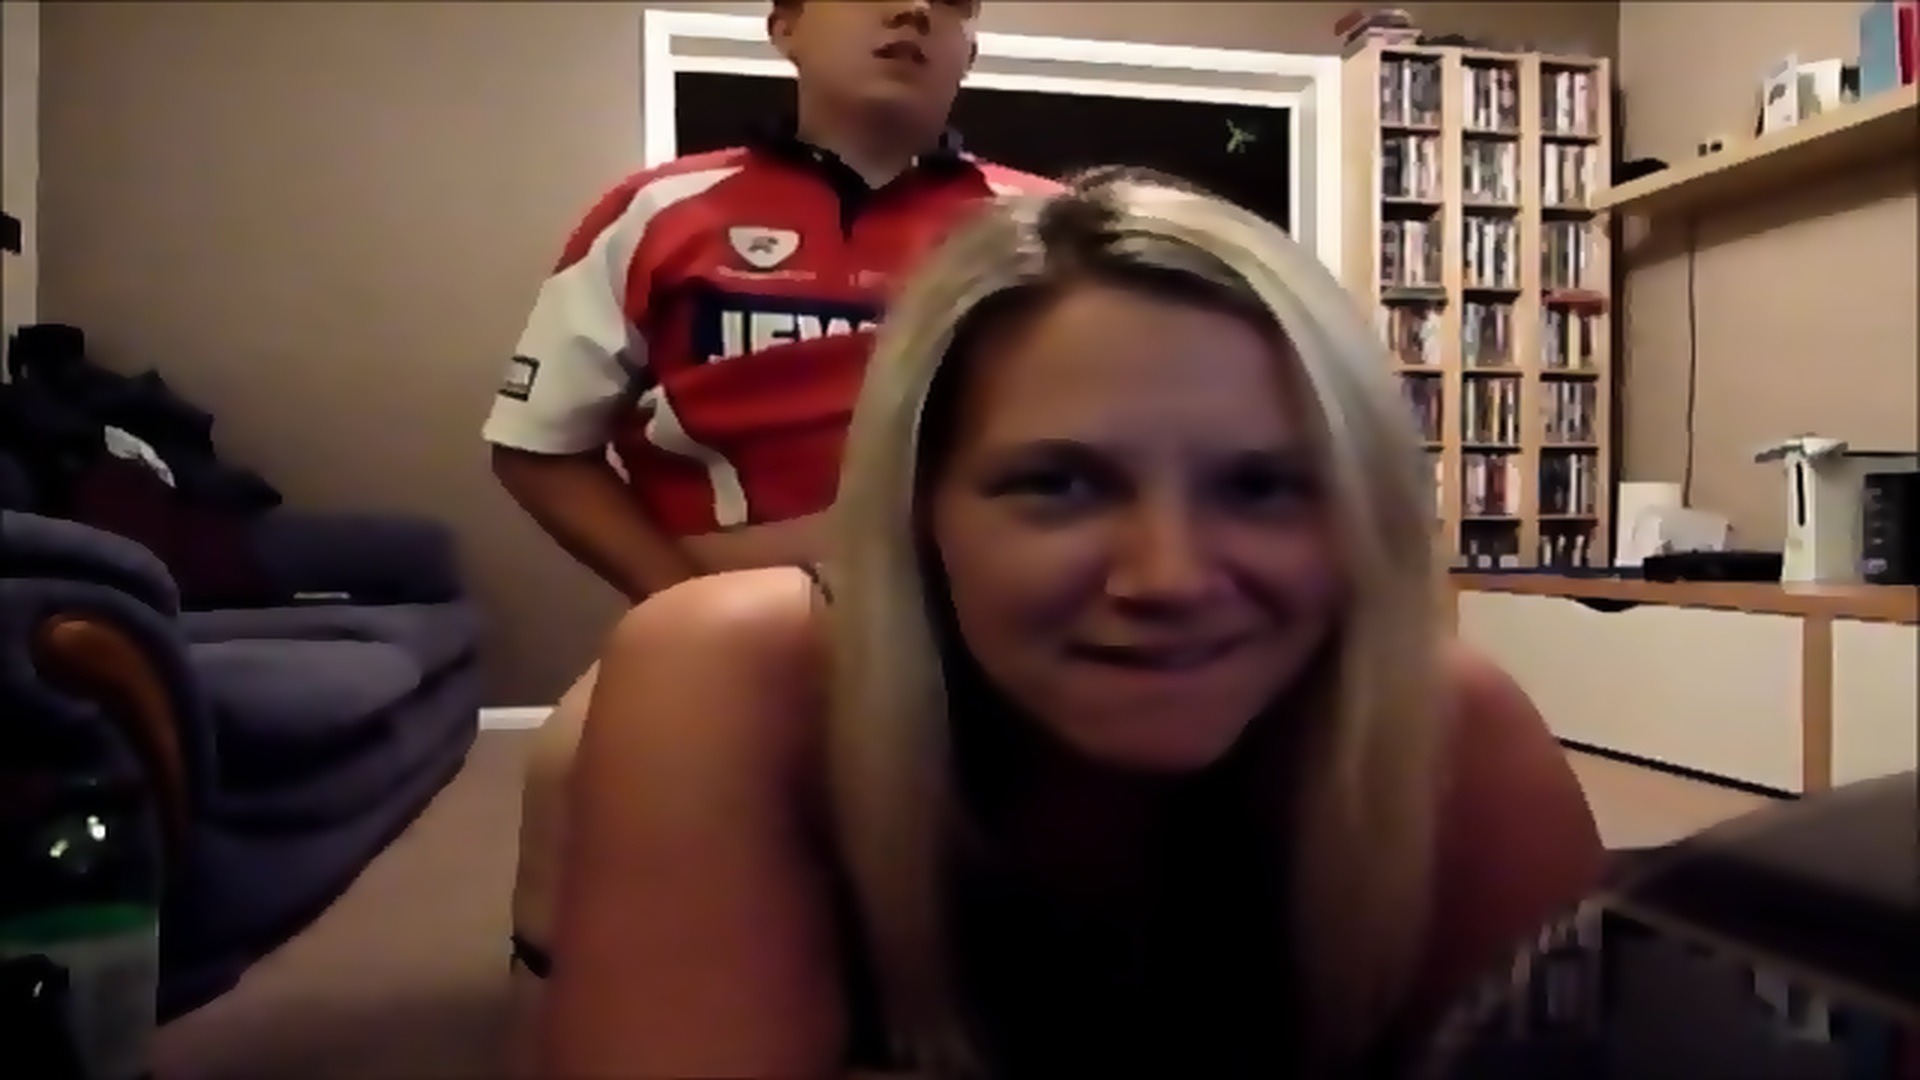 Rachel UK Dogging Hotwife Lets Young Lad Have A Go image picture